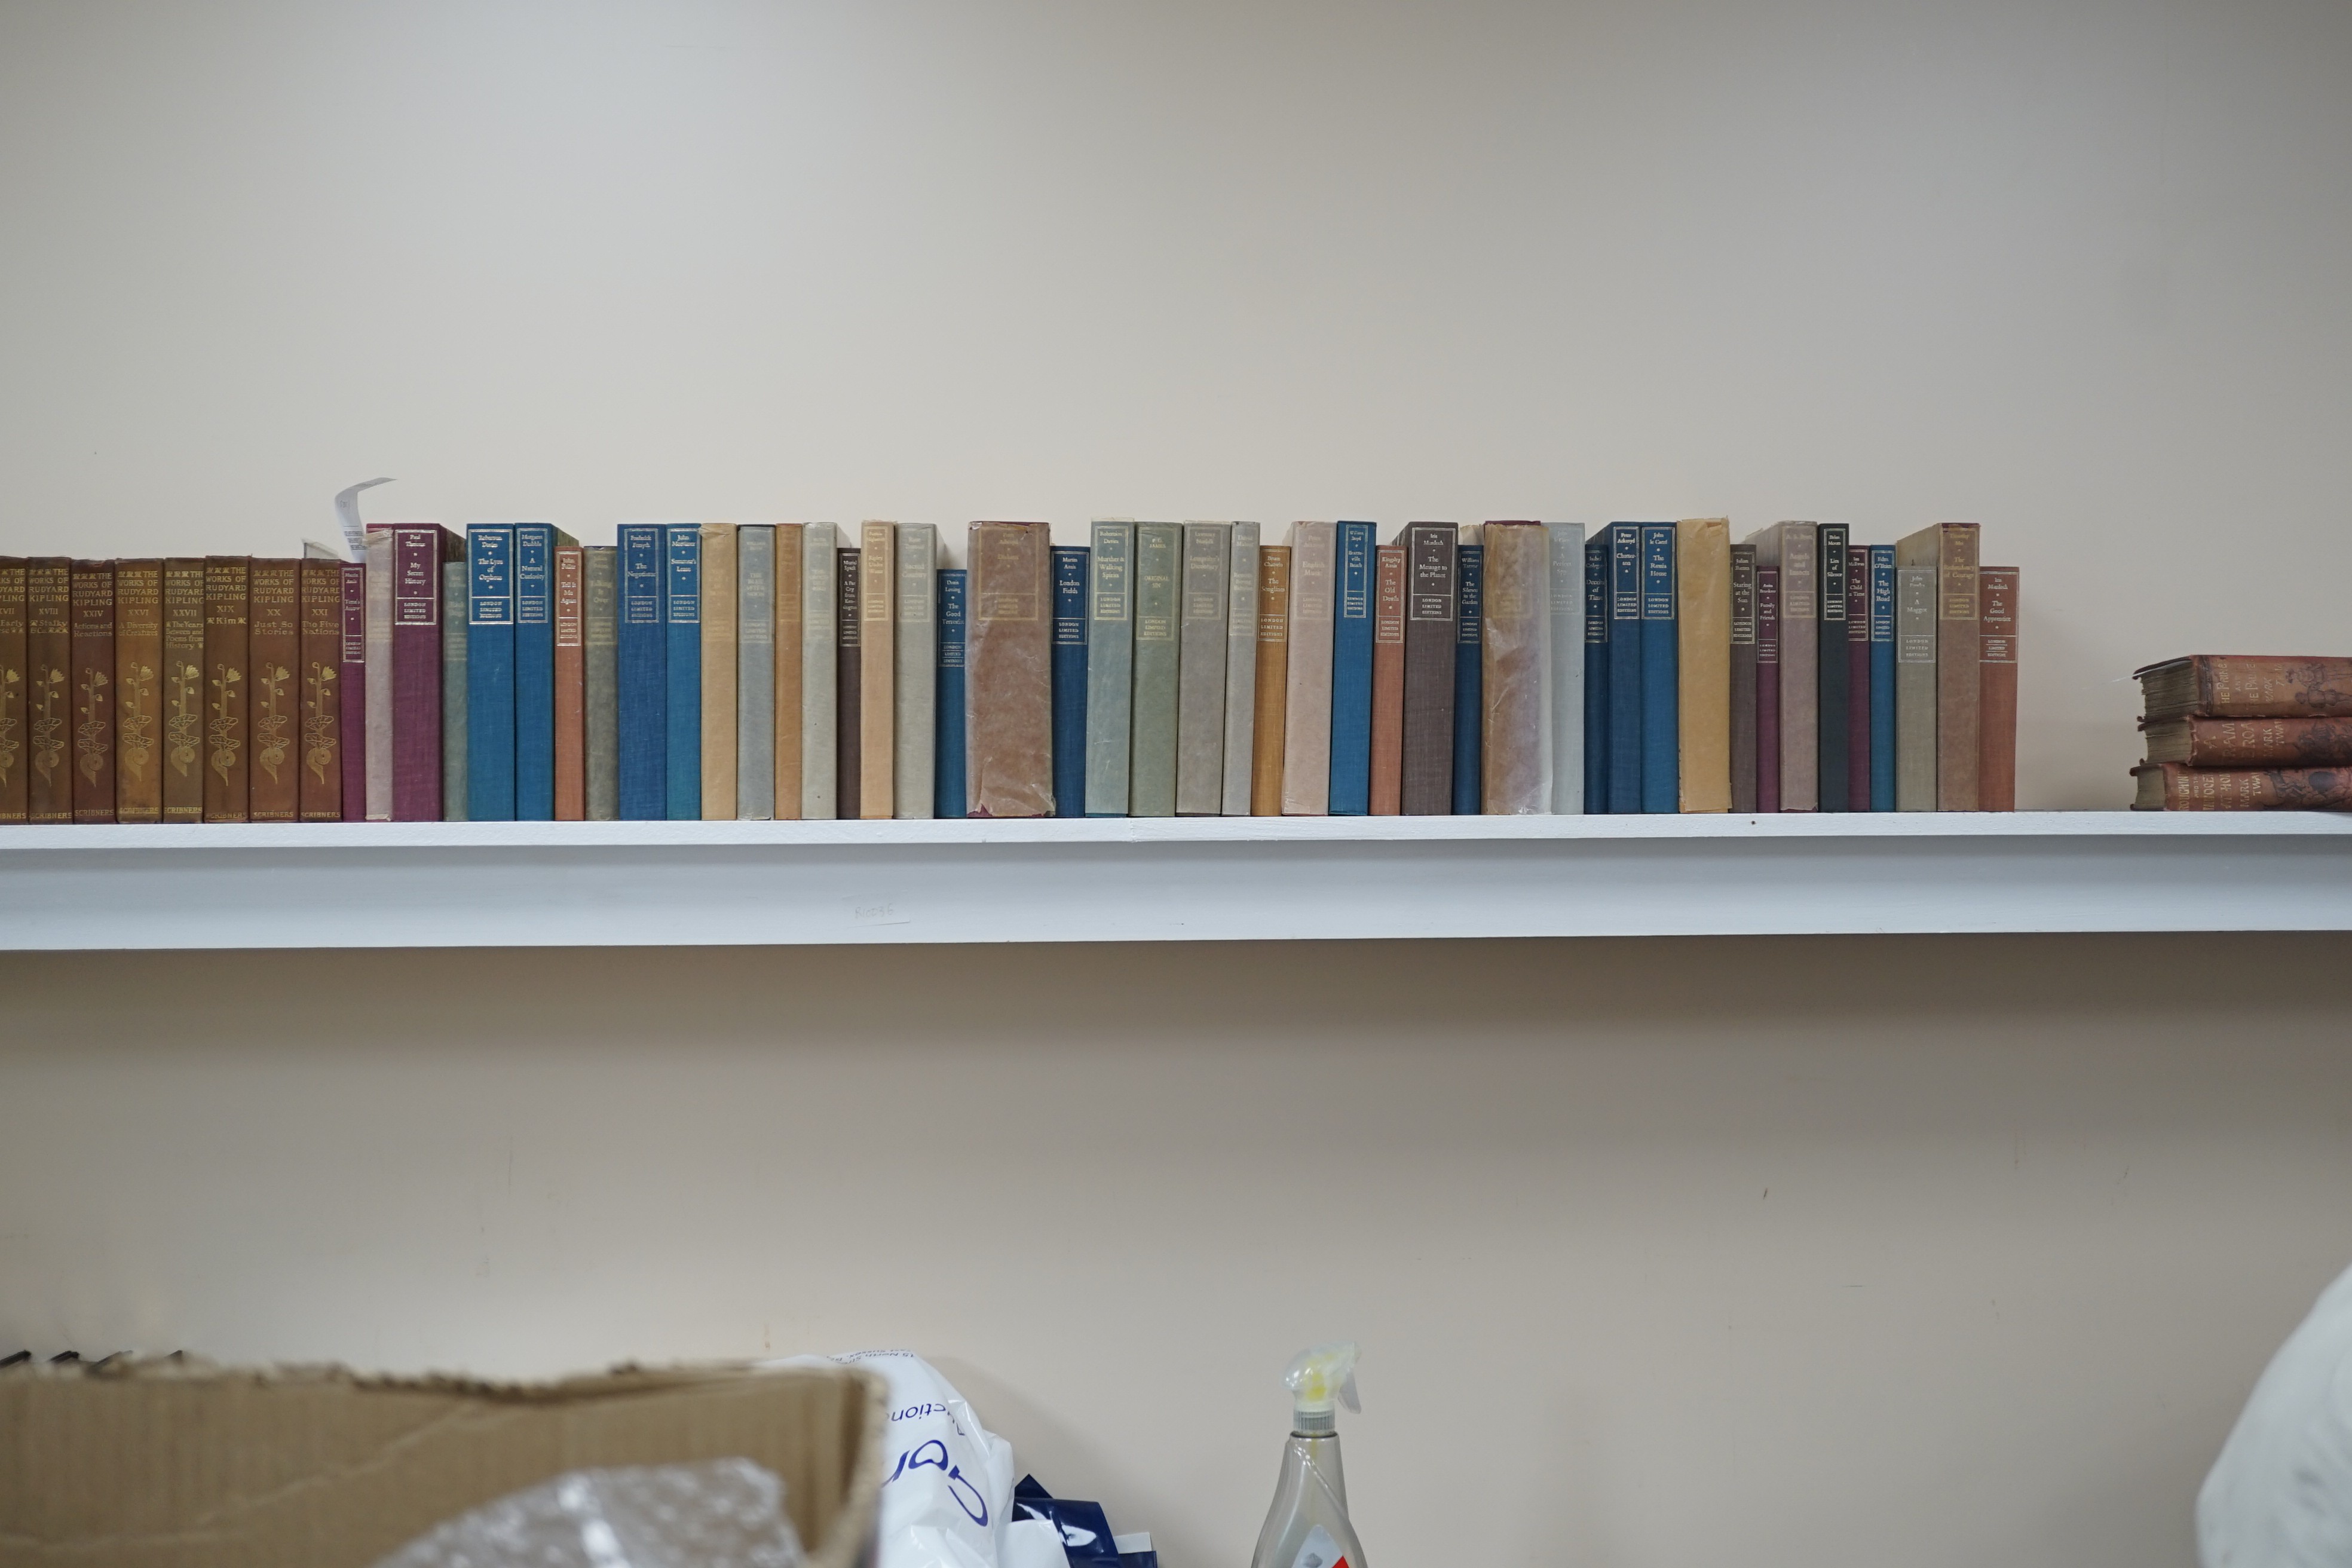 FIRST EDITIONS OR FIRST ENGLISH EDITIONS, ALL SIGNED BY THE AUTHORS. A FINE AND COMPLETE SET. London Limited Editions issued titles by contemporary authors between 1985 and 1994, and the set includes works by some of the